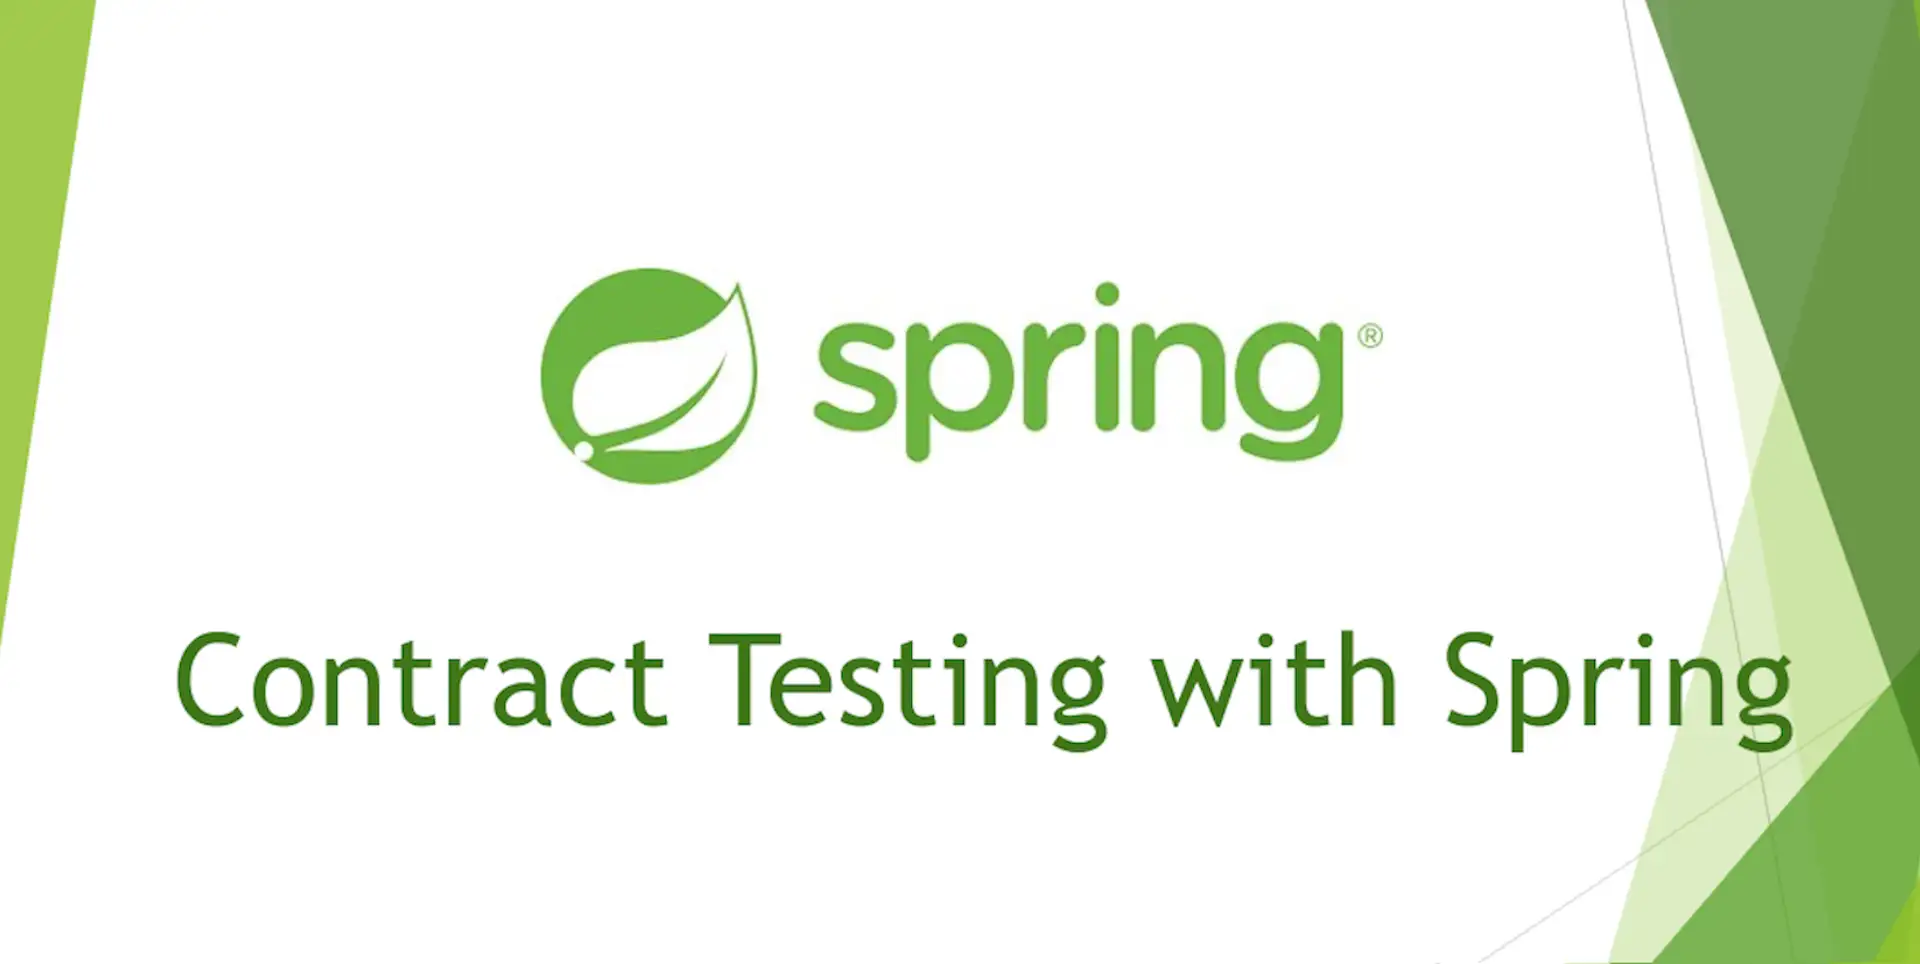 Contract testing with Spring